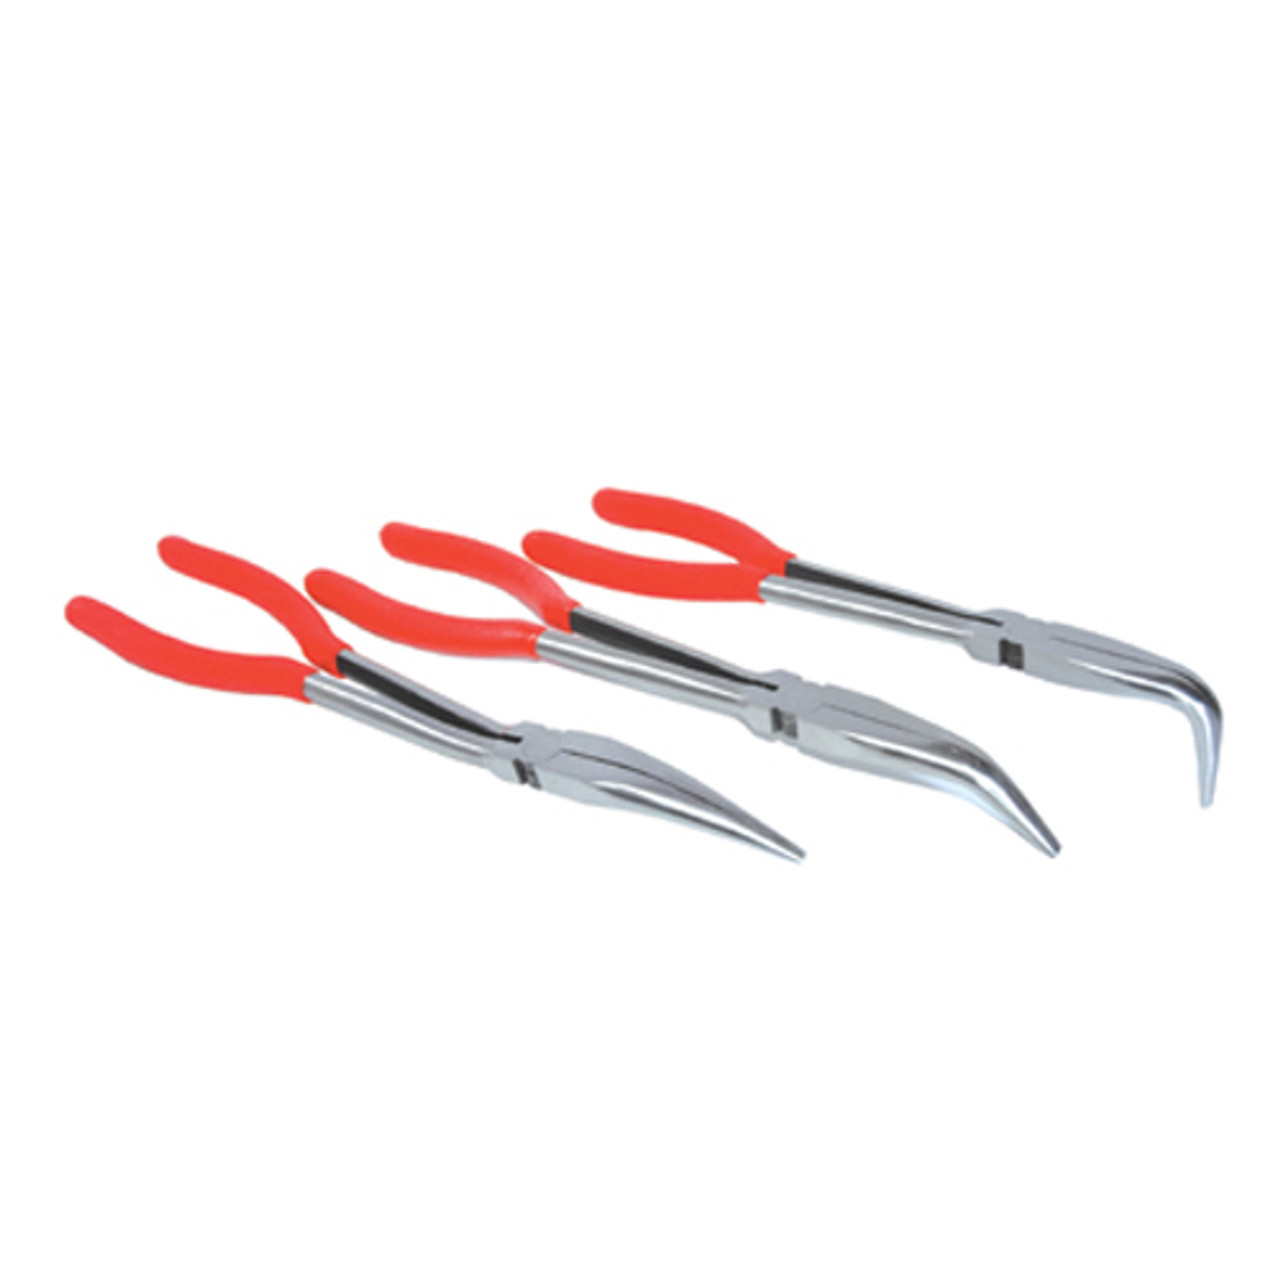 K Tool 51103 Needle Nose Pliers Set, 3 Piece, 11 Long, with